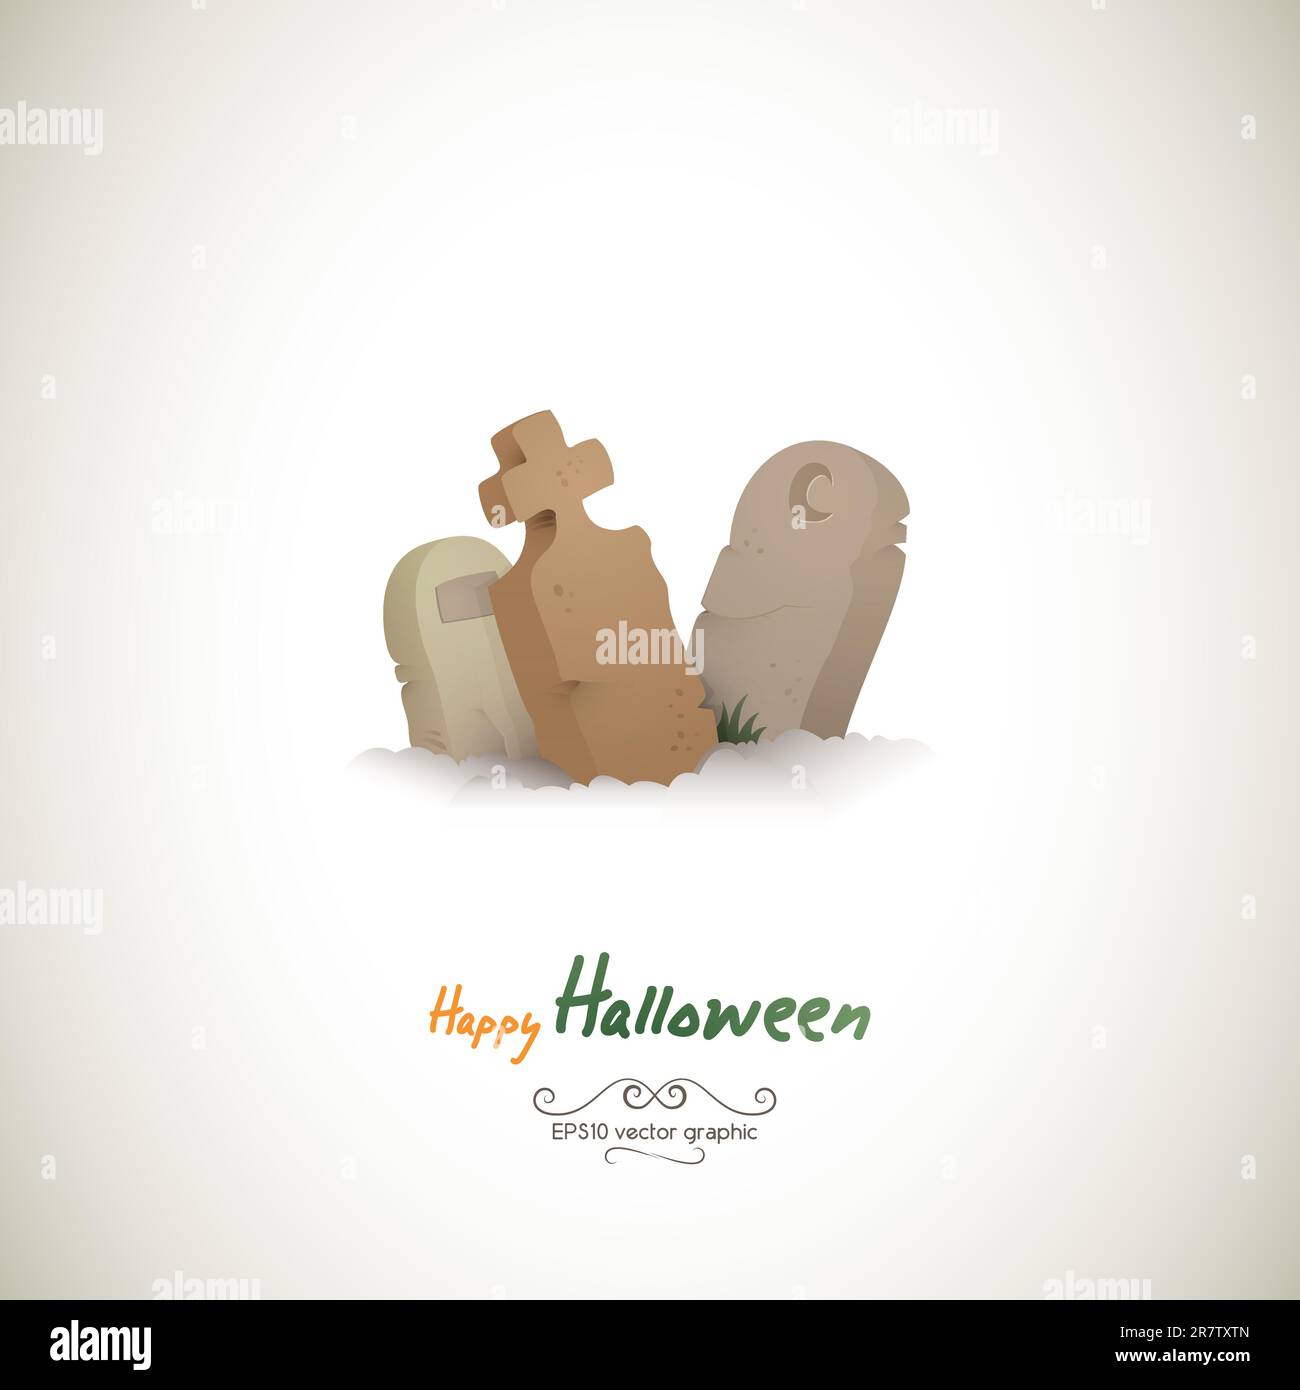 Three Lonely Halloween Graves | EPS10 graphic | Separate layers named accordingly Stock Vector